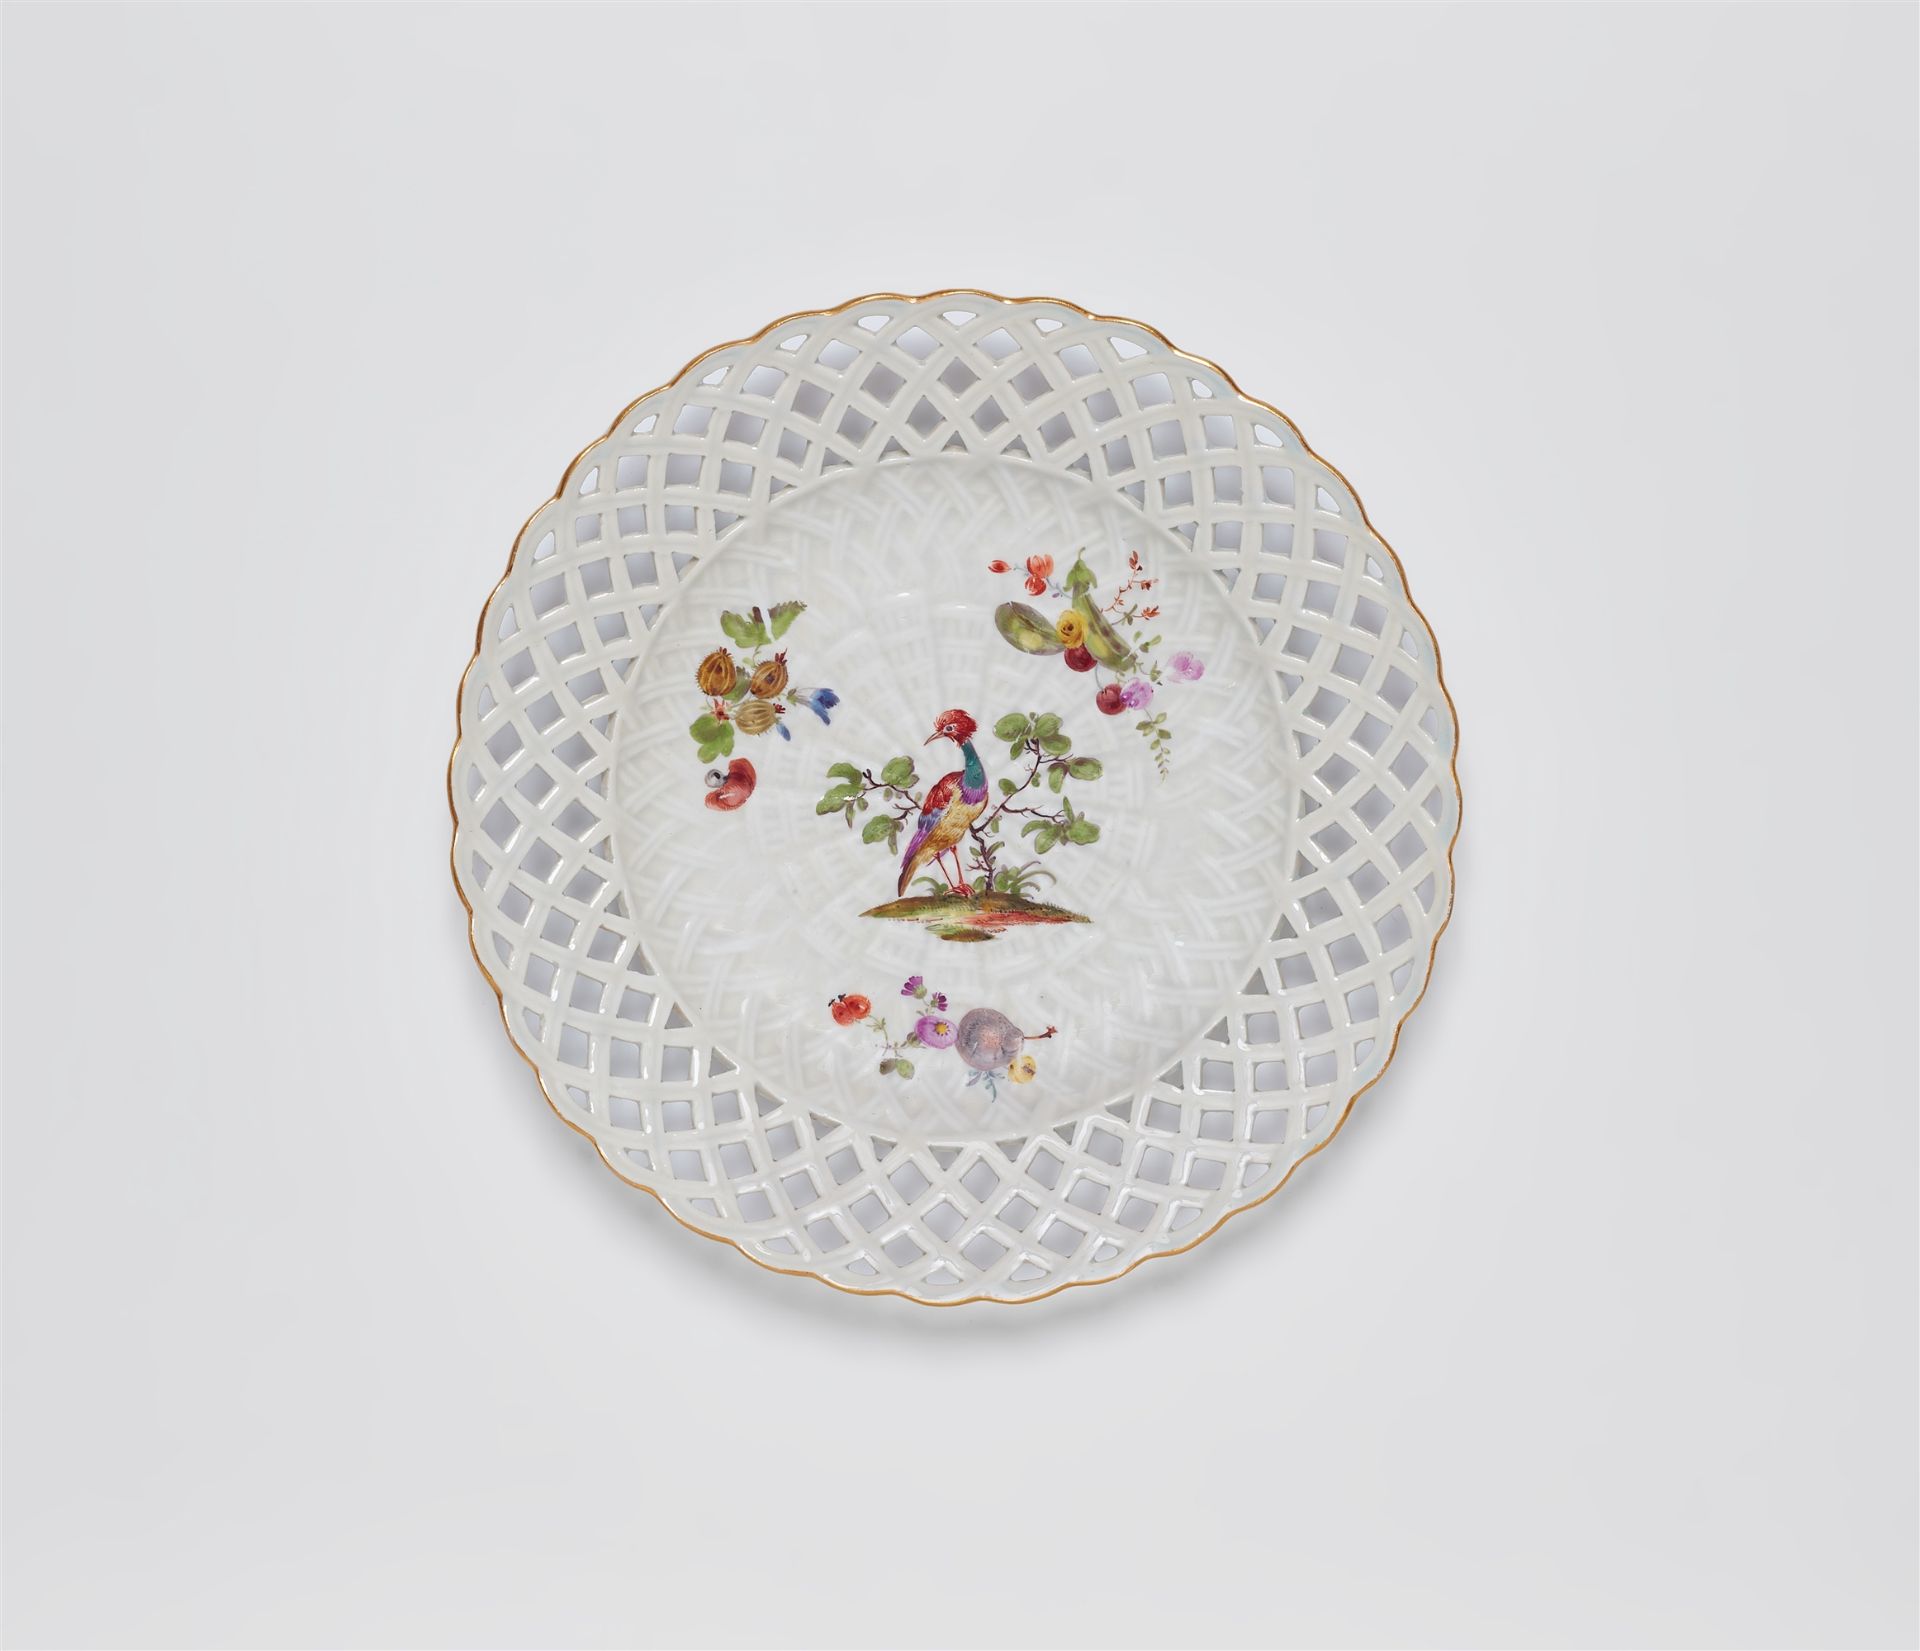 A Meissen porcelain dessert plate from a service for King Frederick II with Indian birds, fruit and 